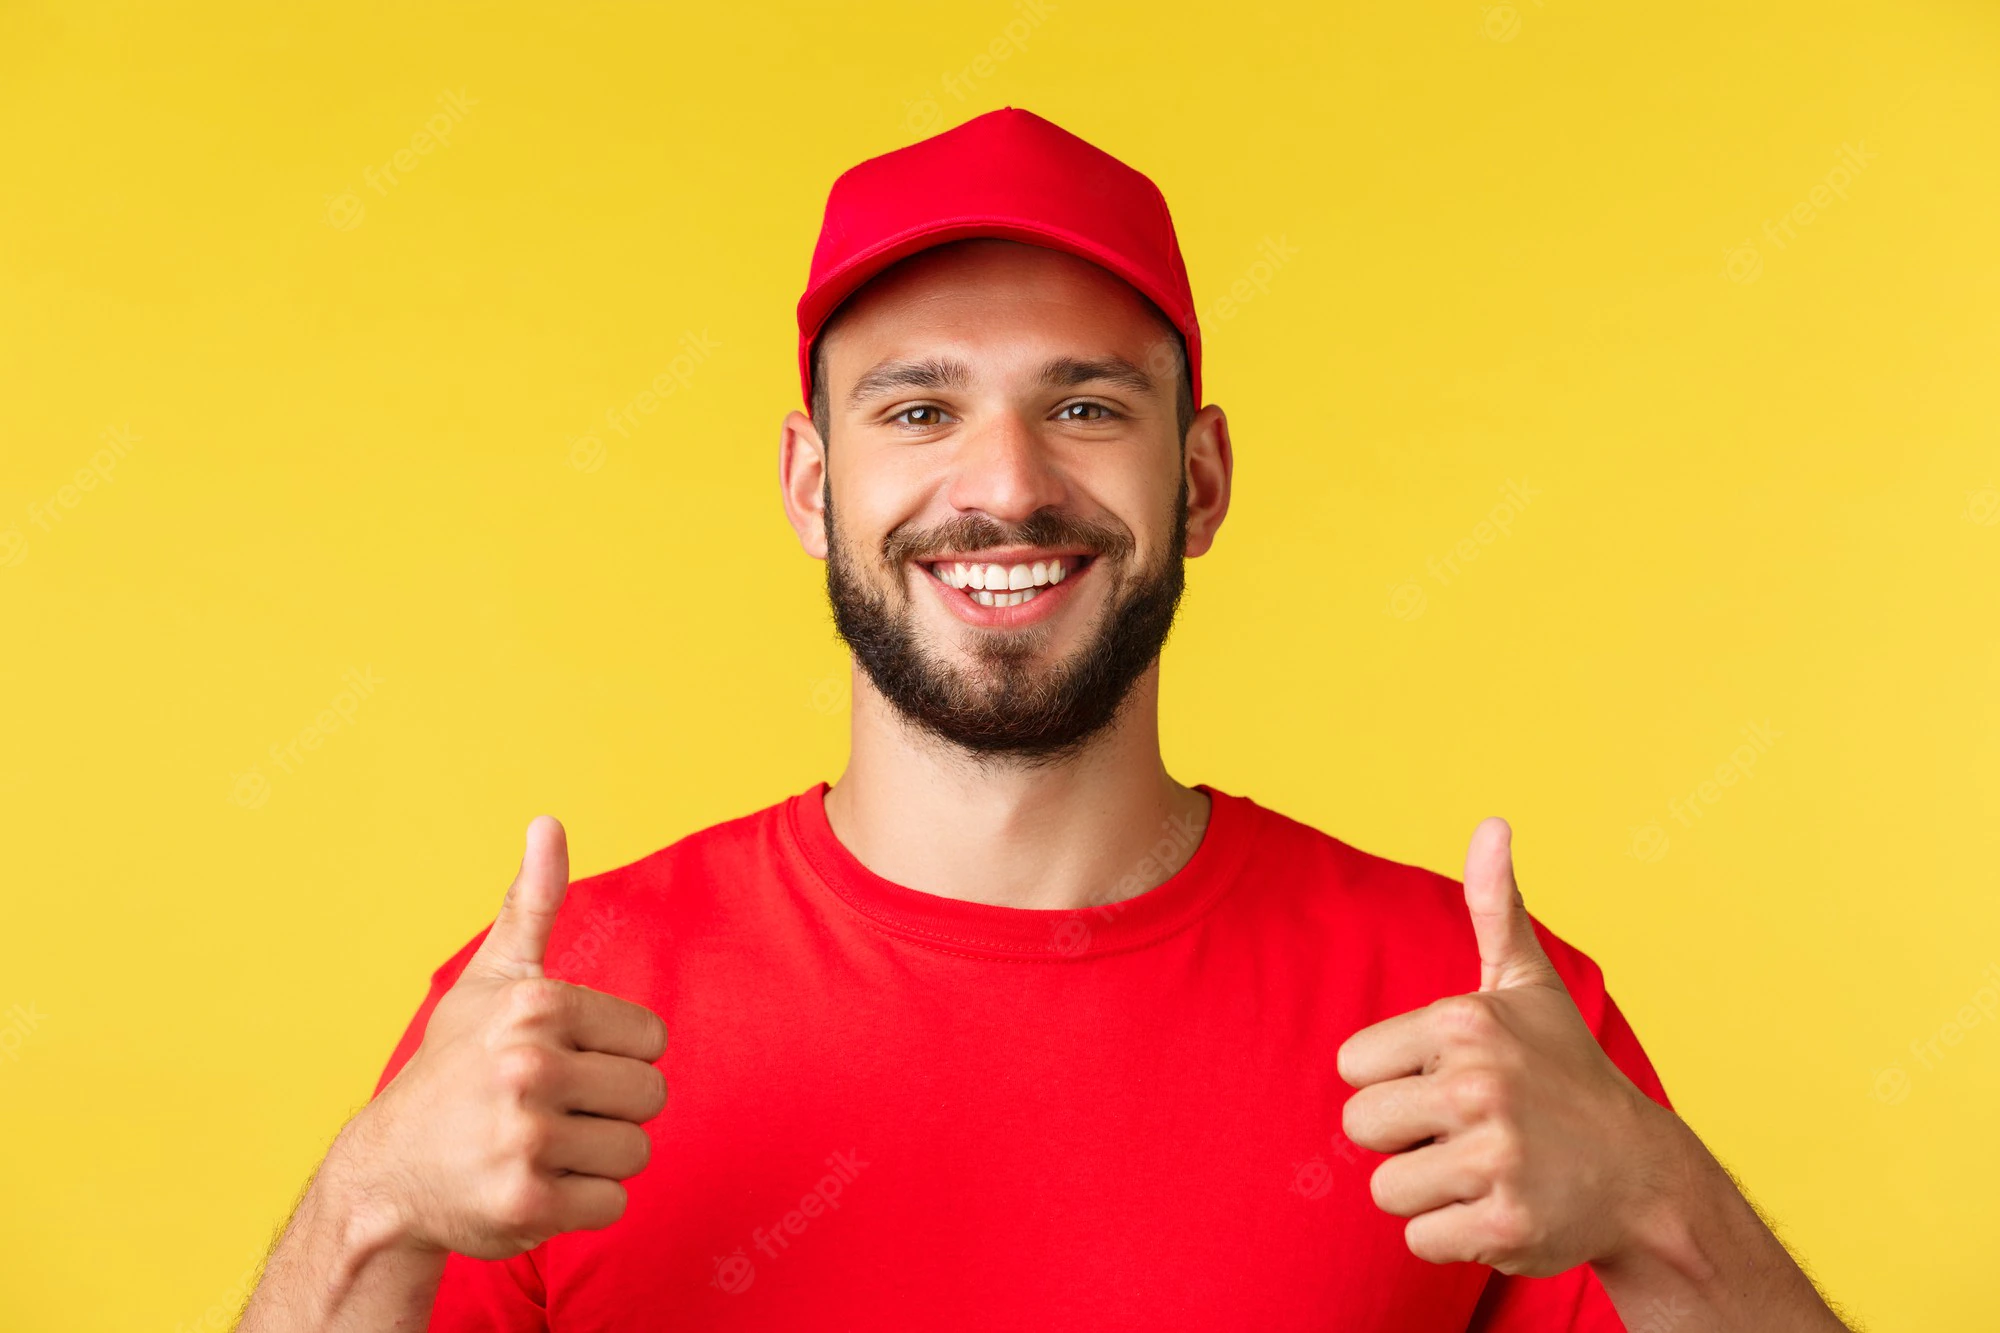 Closeup Friendly Smiling Delivery Guy Red Uniform Cap Tshirt Provide Best Express Shipping 1258 60905